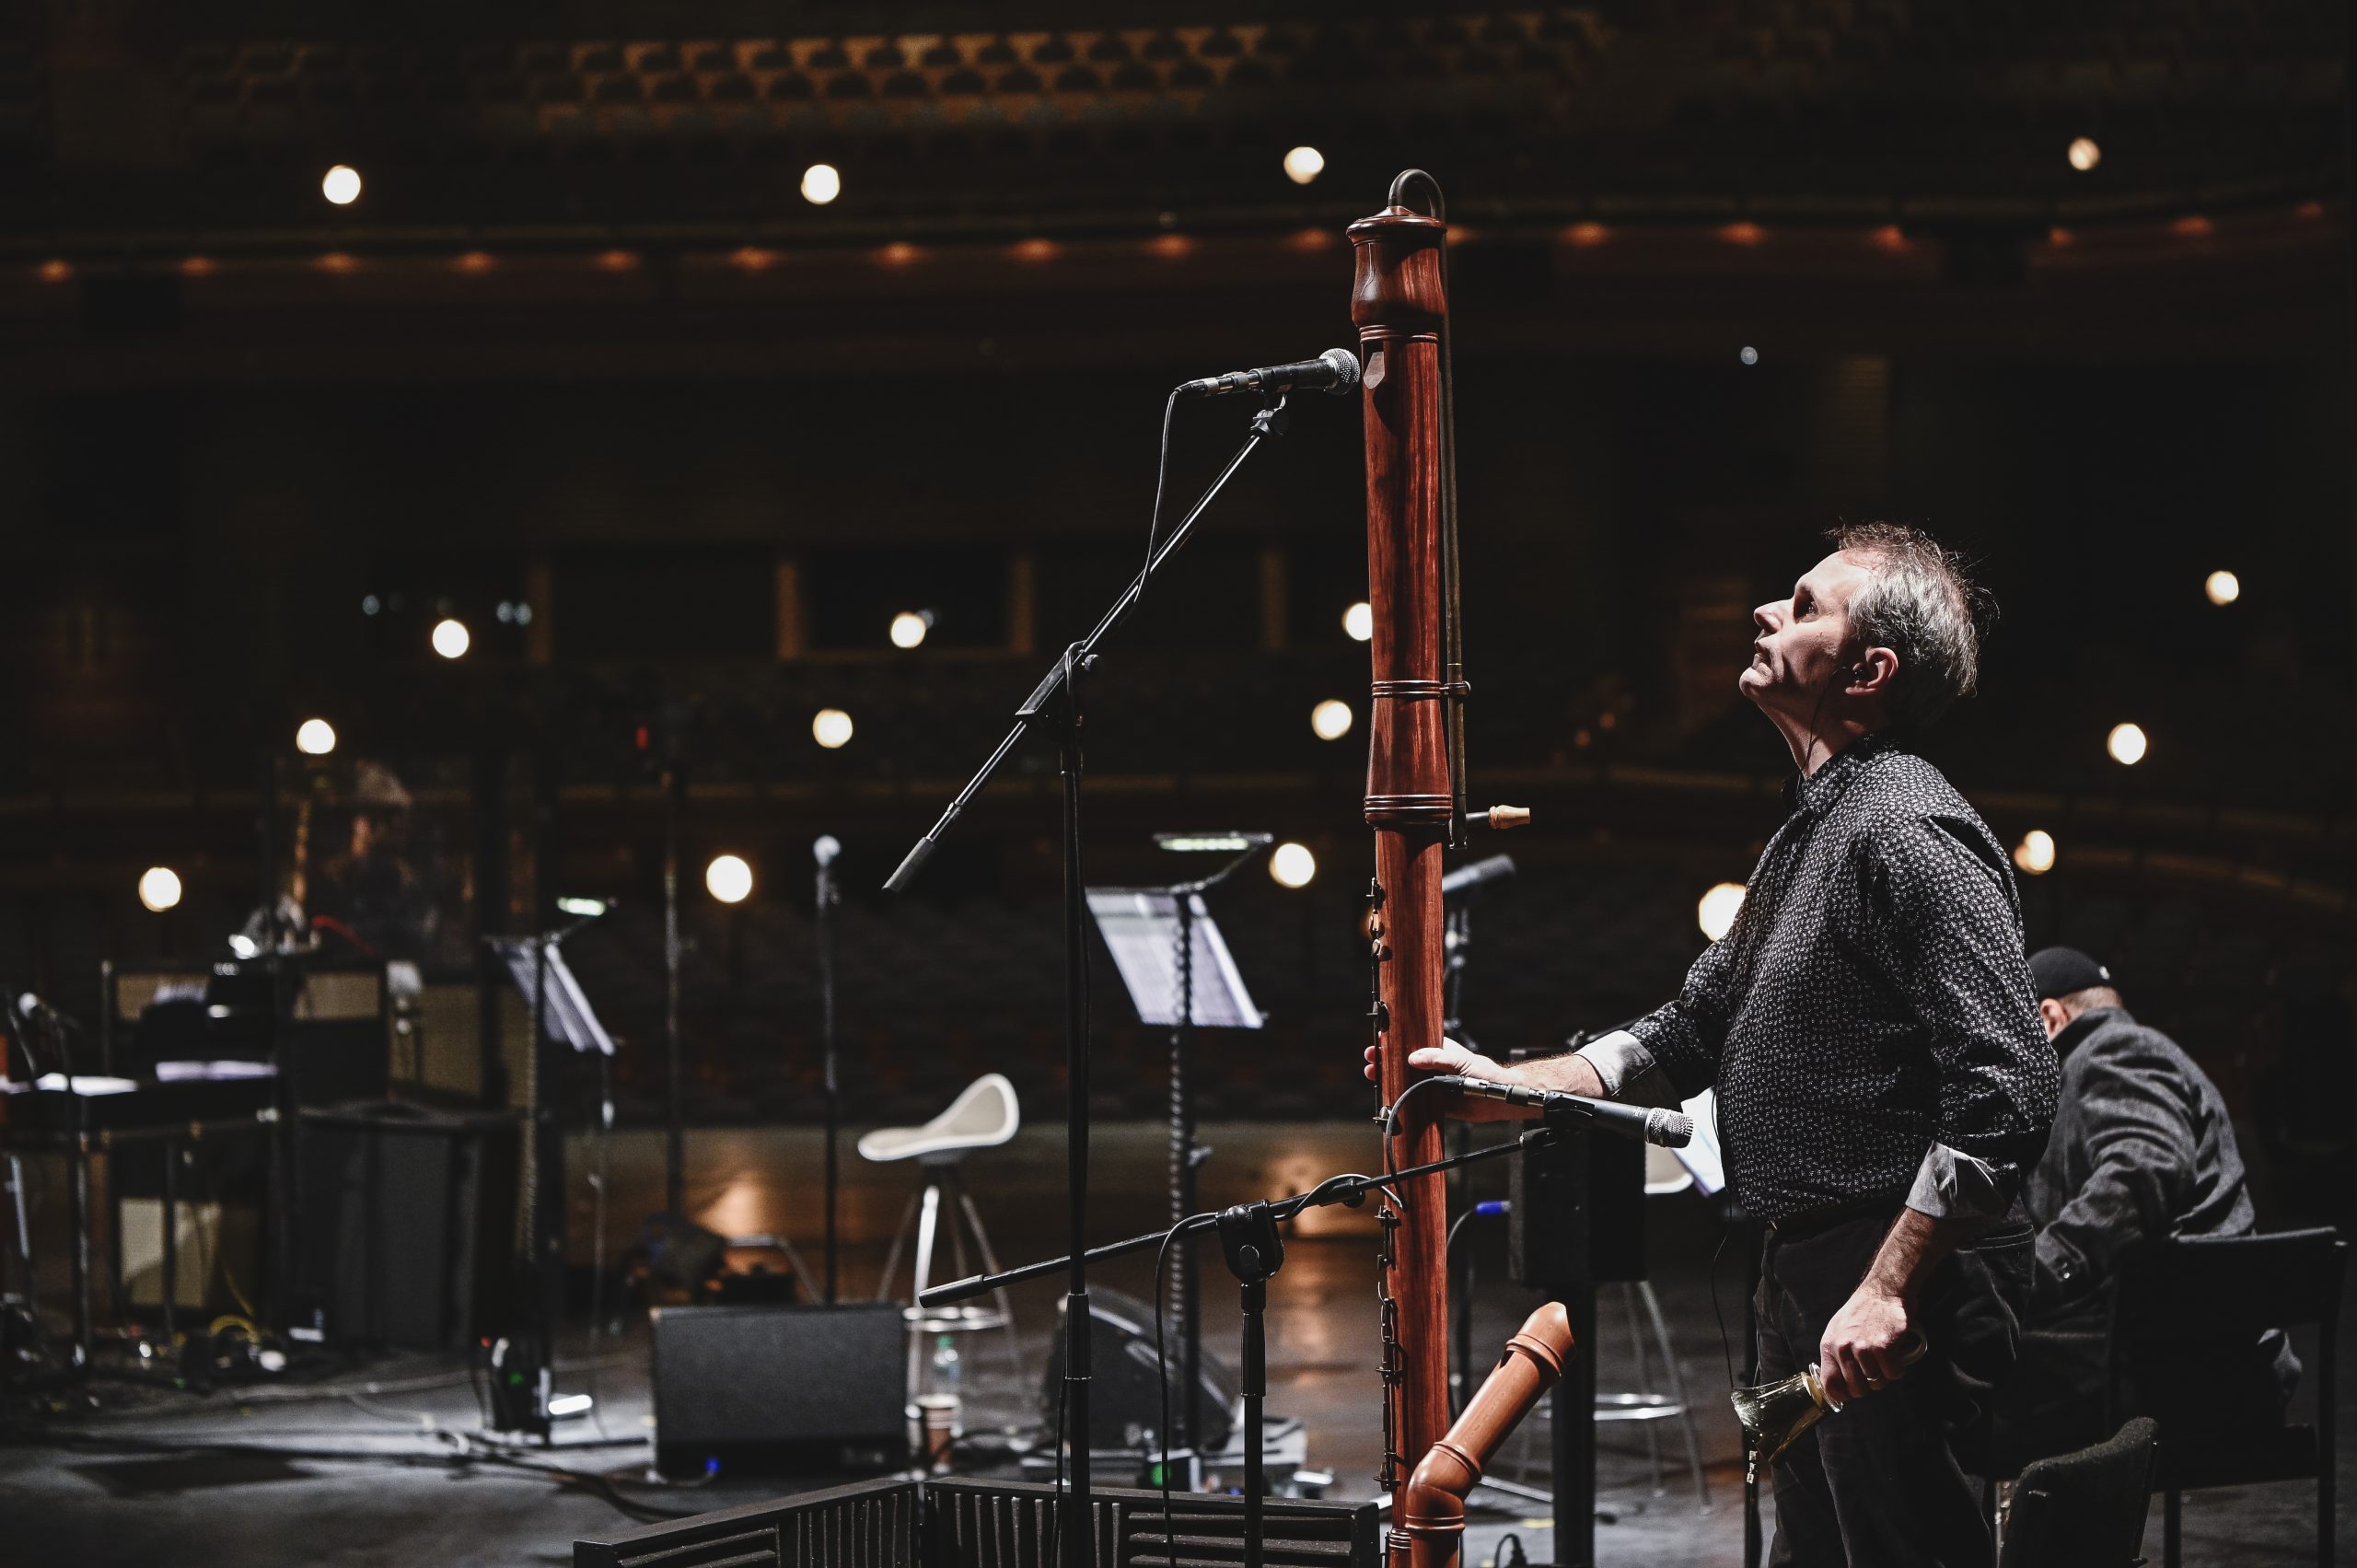 A tall woodwind instrument towers over a middle aged white male. He holds it with one hand and looks up to the mouthpiece at the top. A stage setting in the background shows music stands and microphones.